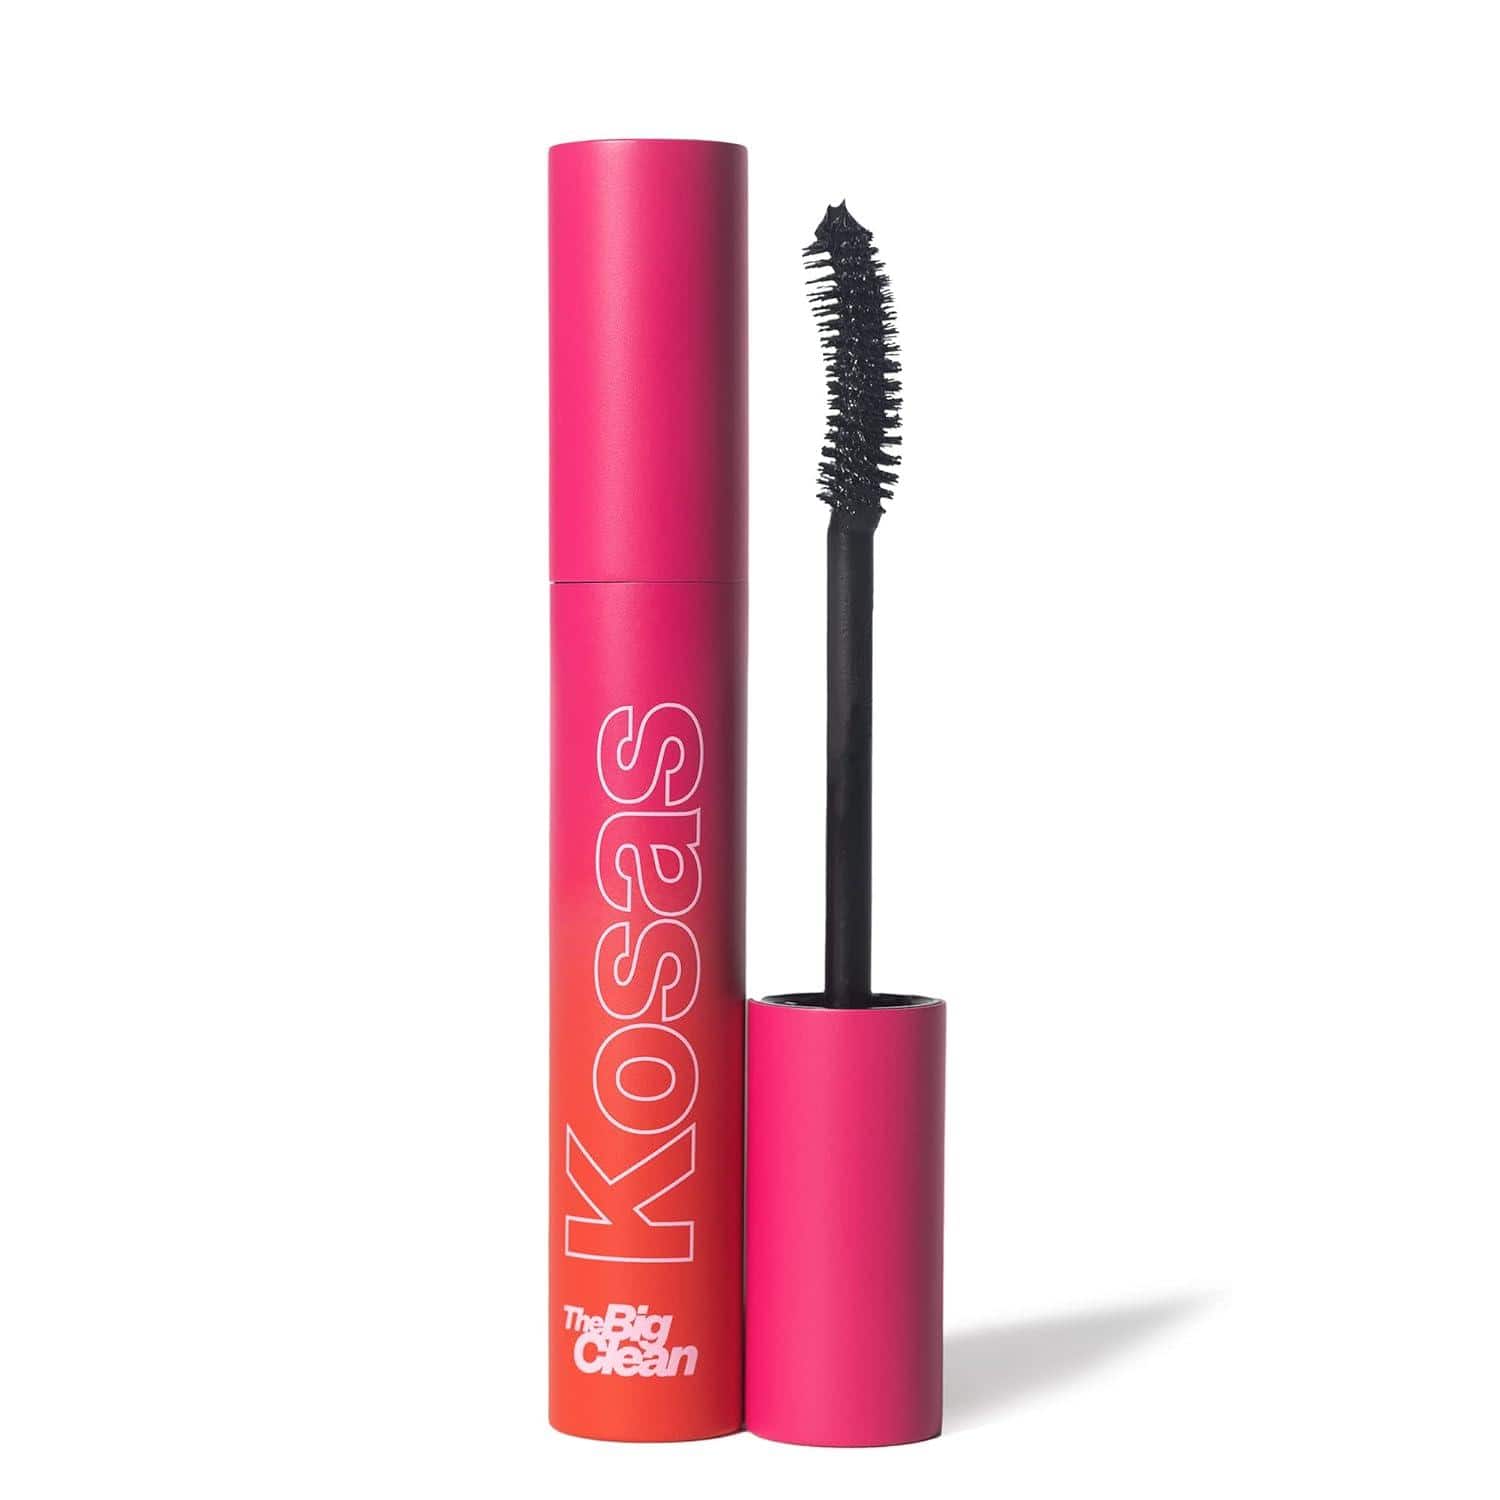 Embracing clean beauty, Kosas impresses with a volumizing mascara formula tested by ophthalmologists, delivering full and fluffy lashes through lash-boosting peptides, castor oil, and panthenol.